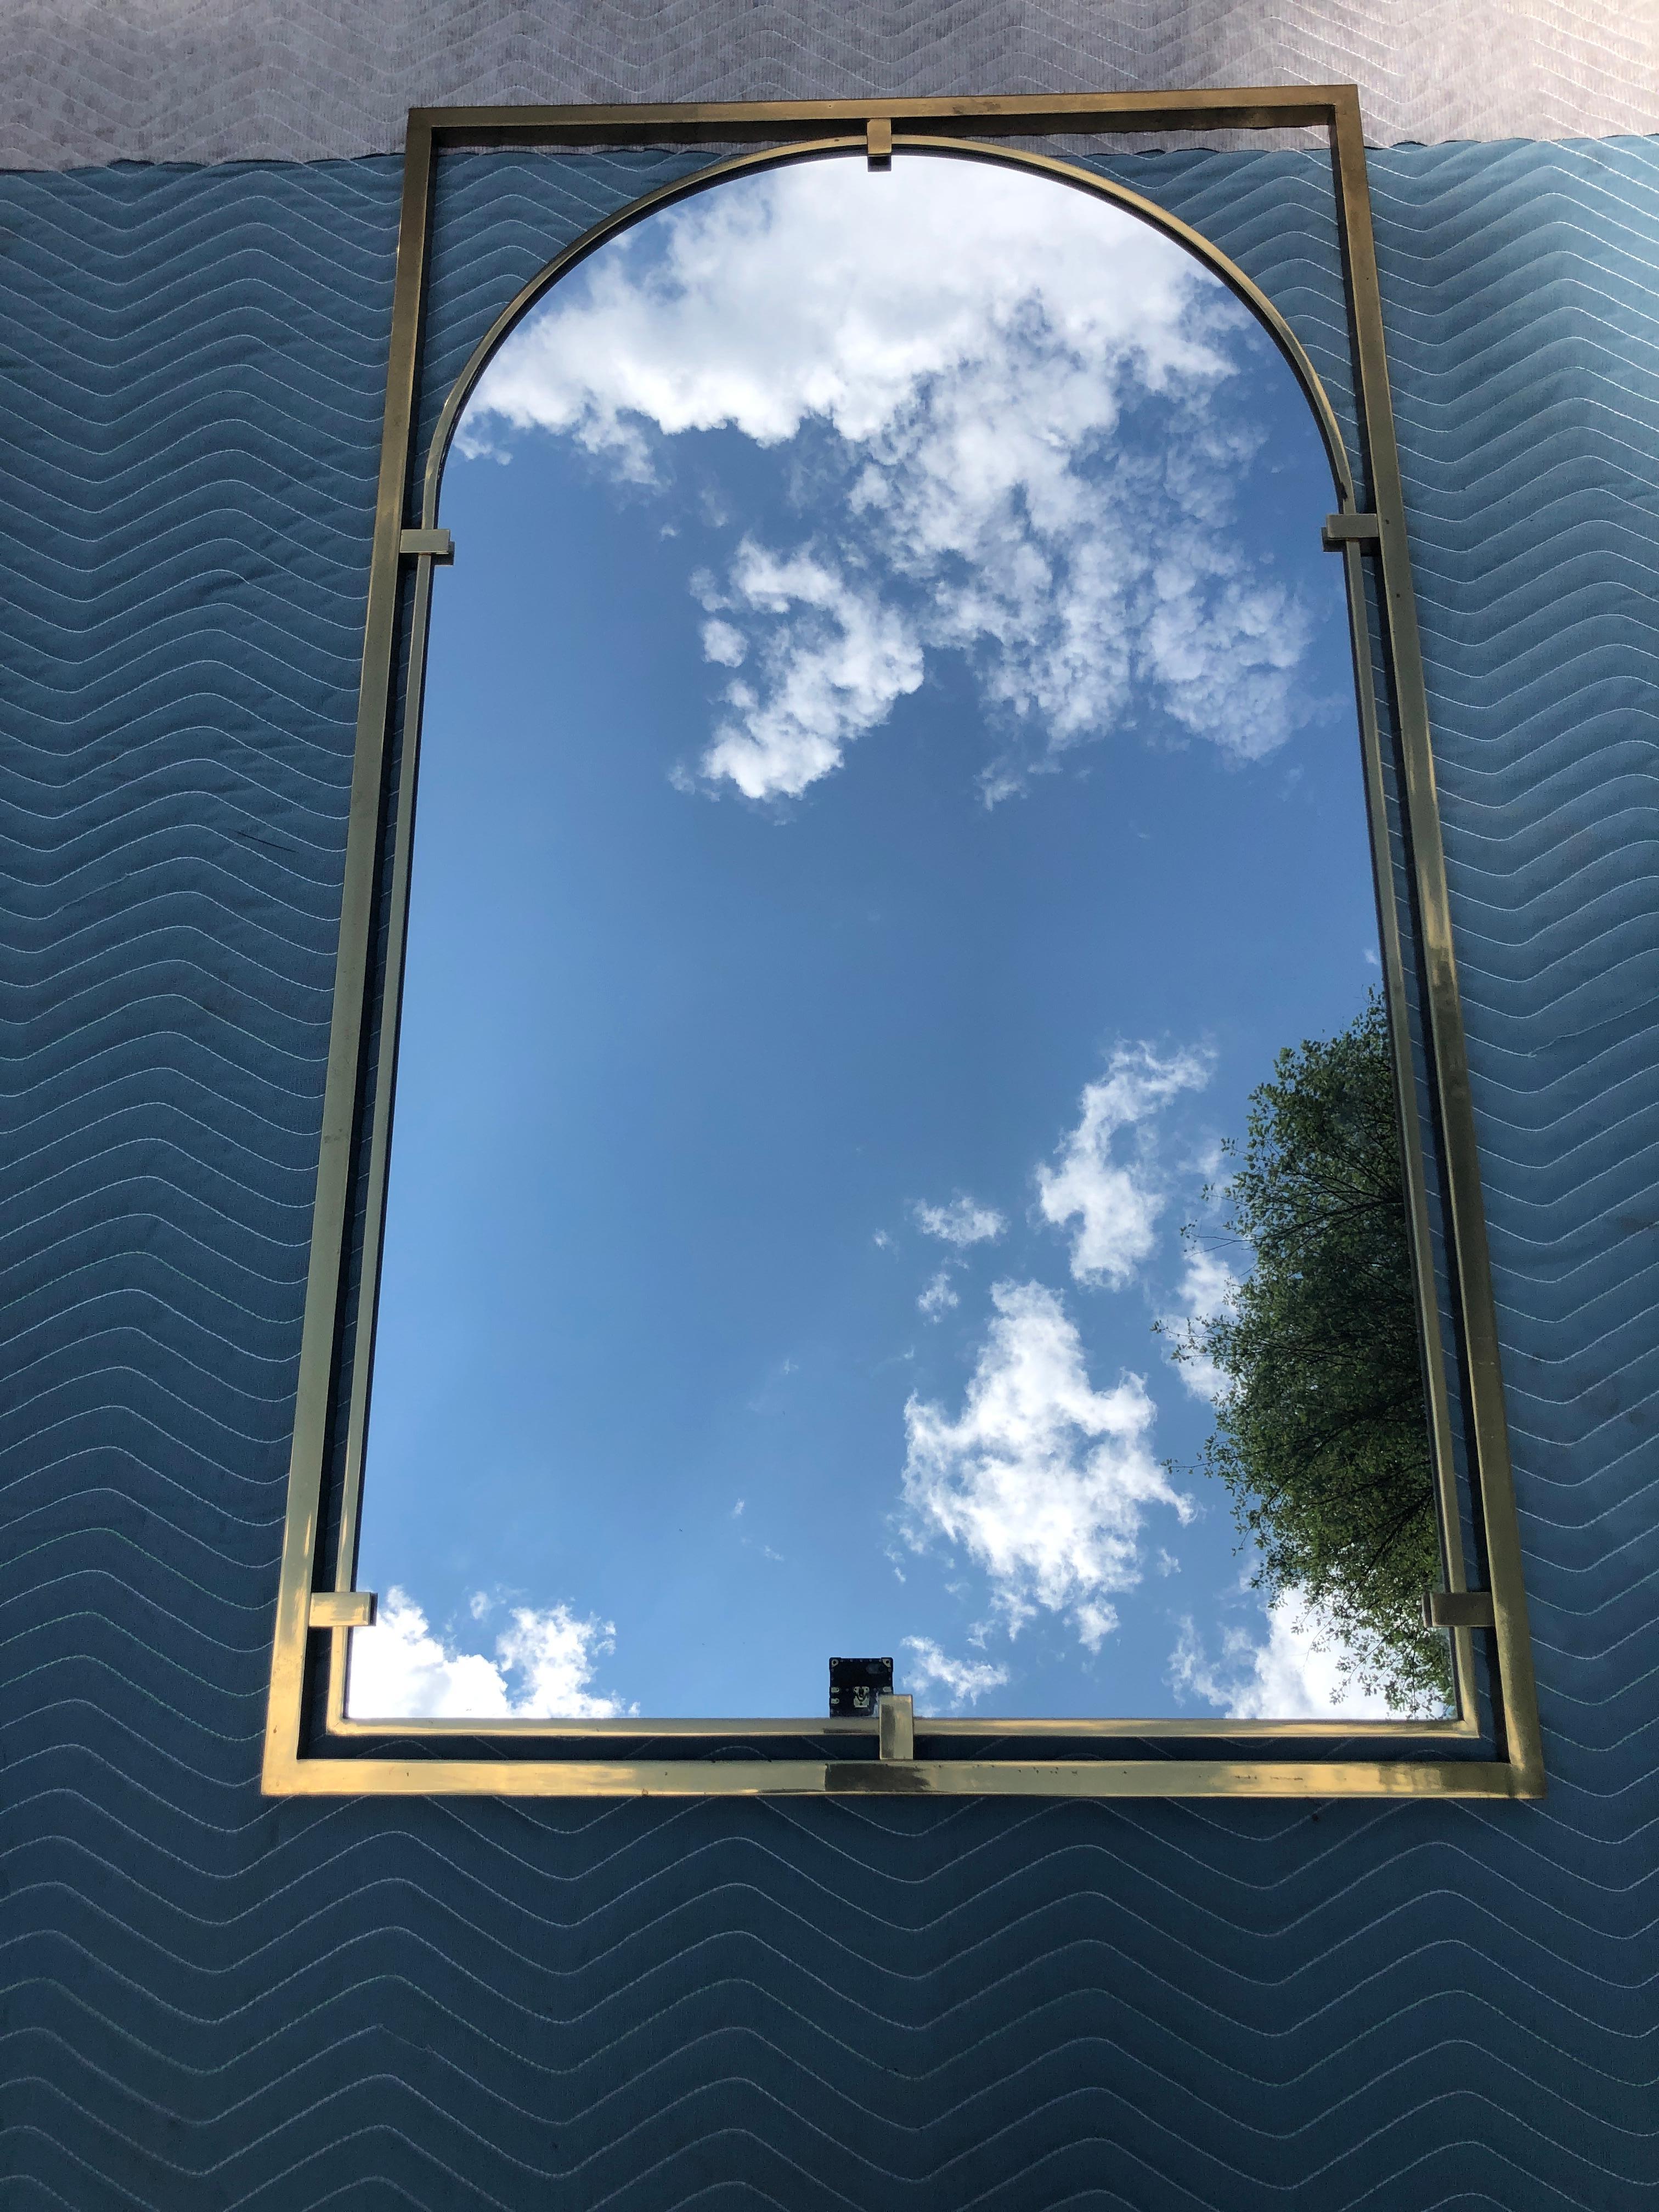  Dramatic and Substantial Solid Brass Mirror with modernist Curved Arch Set in a Floating Rectangular Frame Designed By John Widdicomb in The 1960's. This piece measures 47” t x 28” w x 2” d